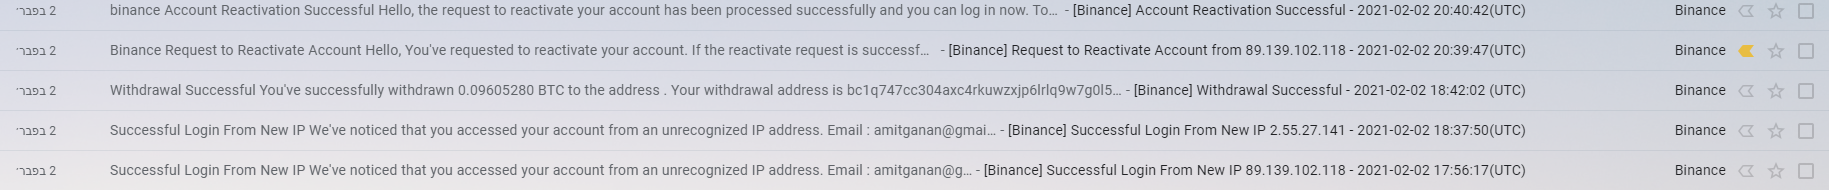 Binance complaint Lost all my funds while account is disabled